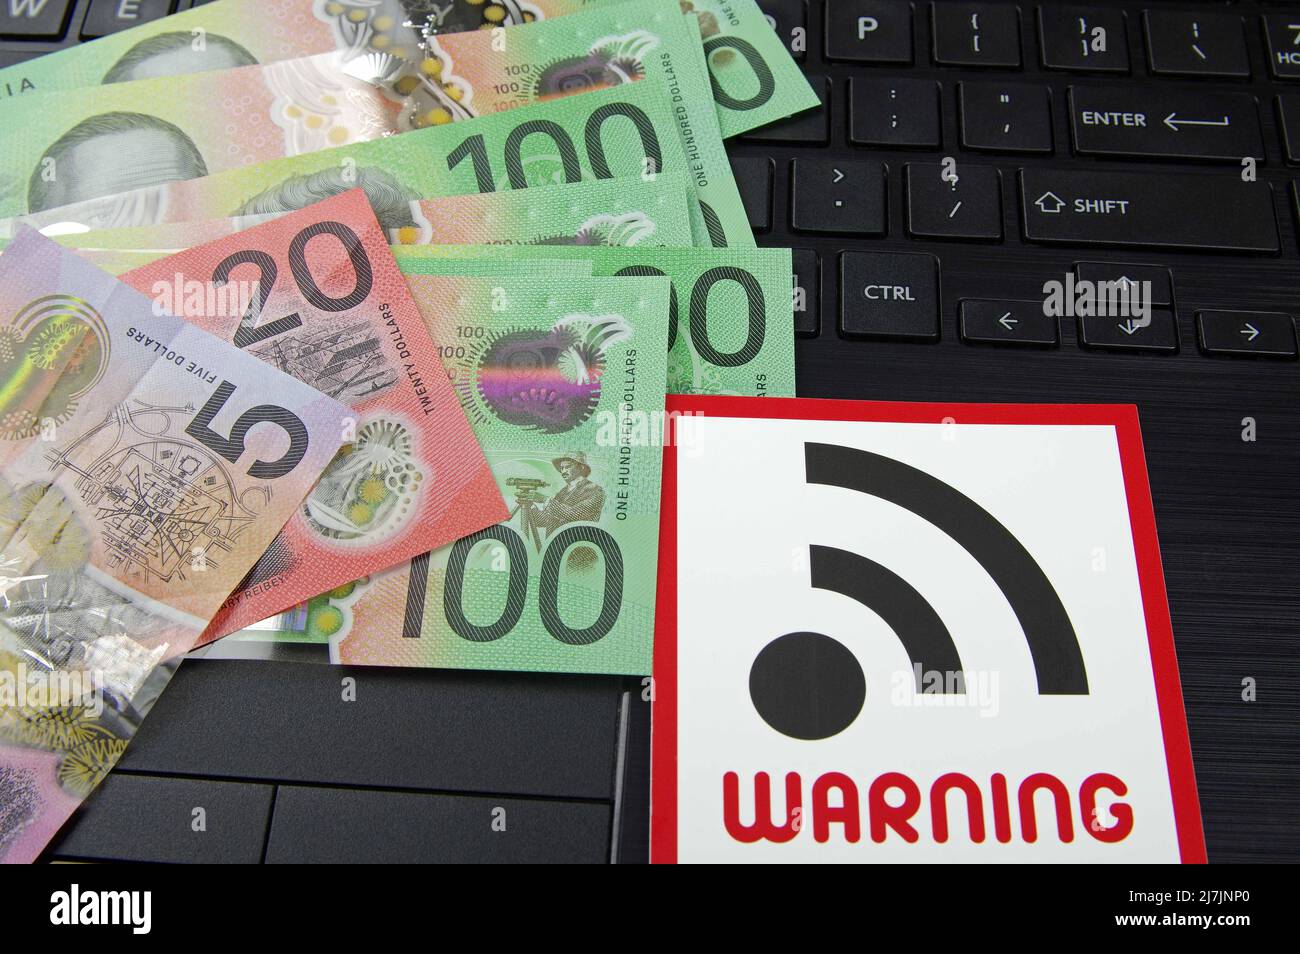 computer keyboard with WIFI warning sign and various bank notes Stock Photo